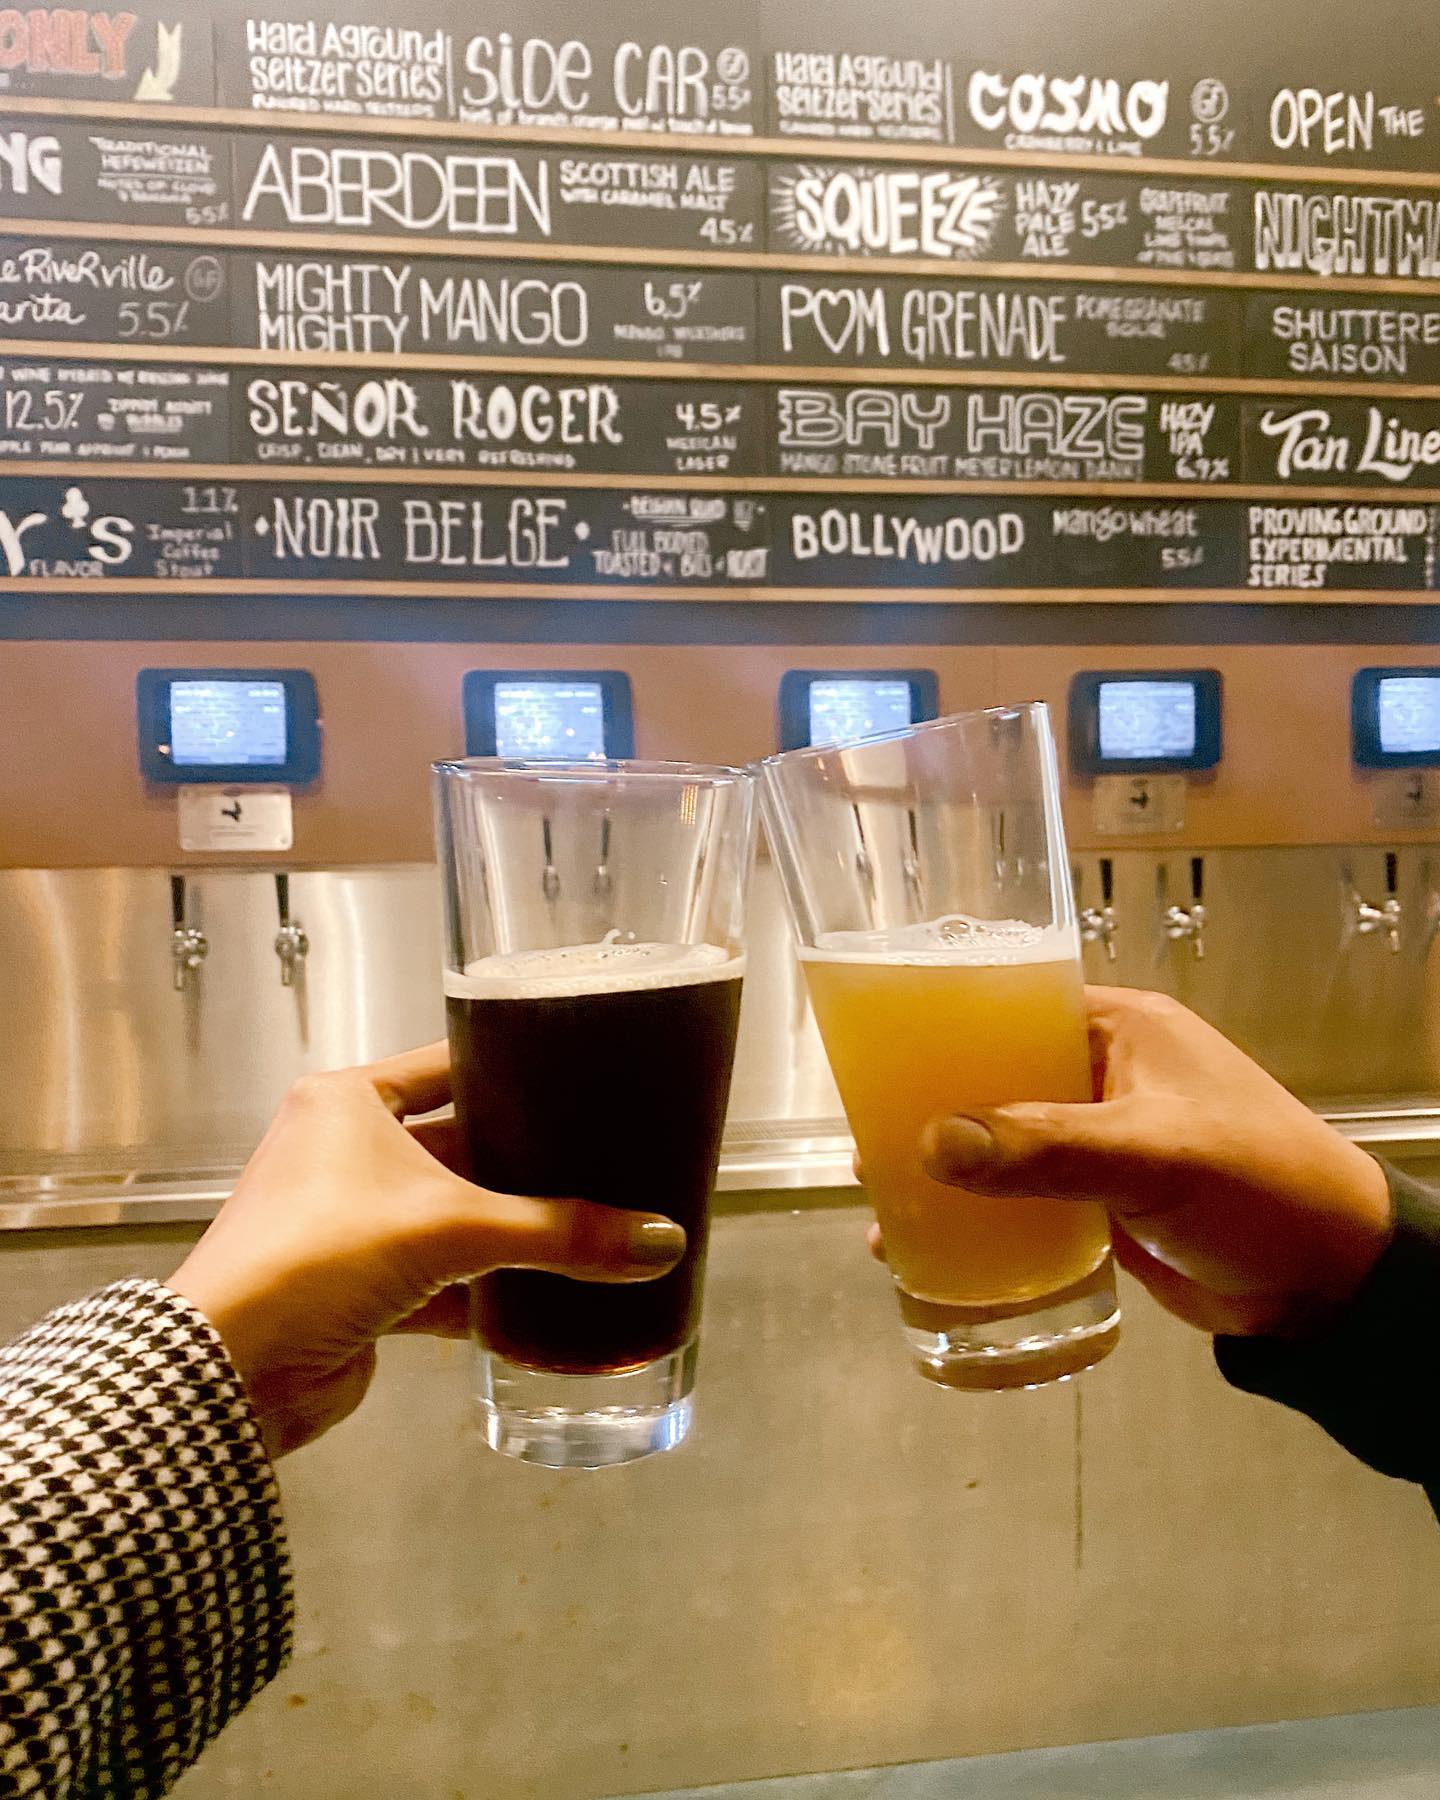 Two Beers being toasted in front of the list of beers